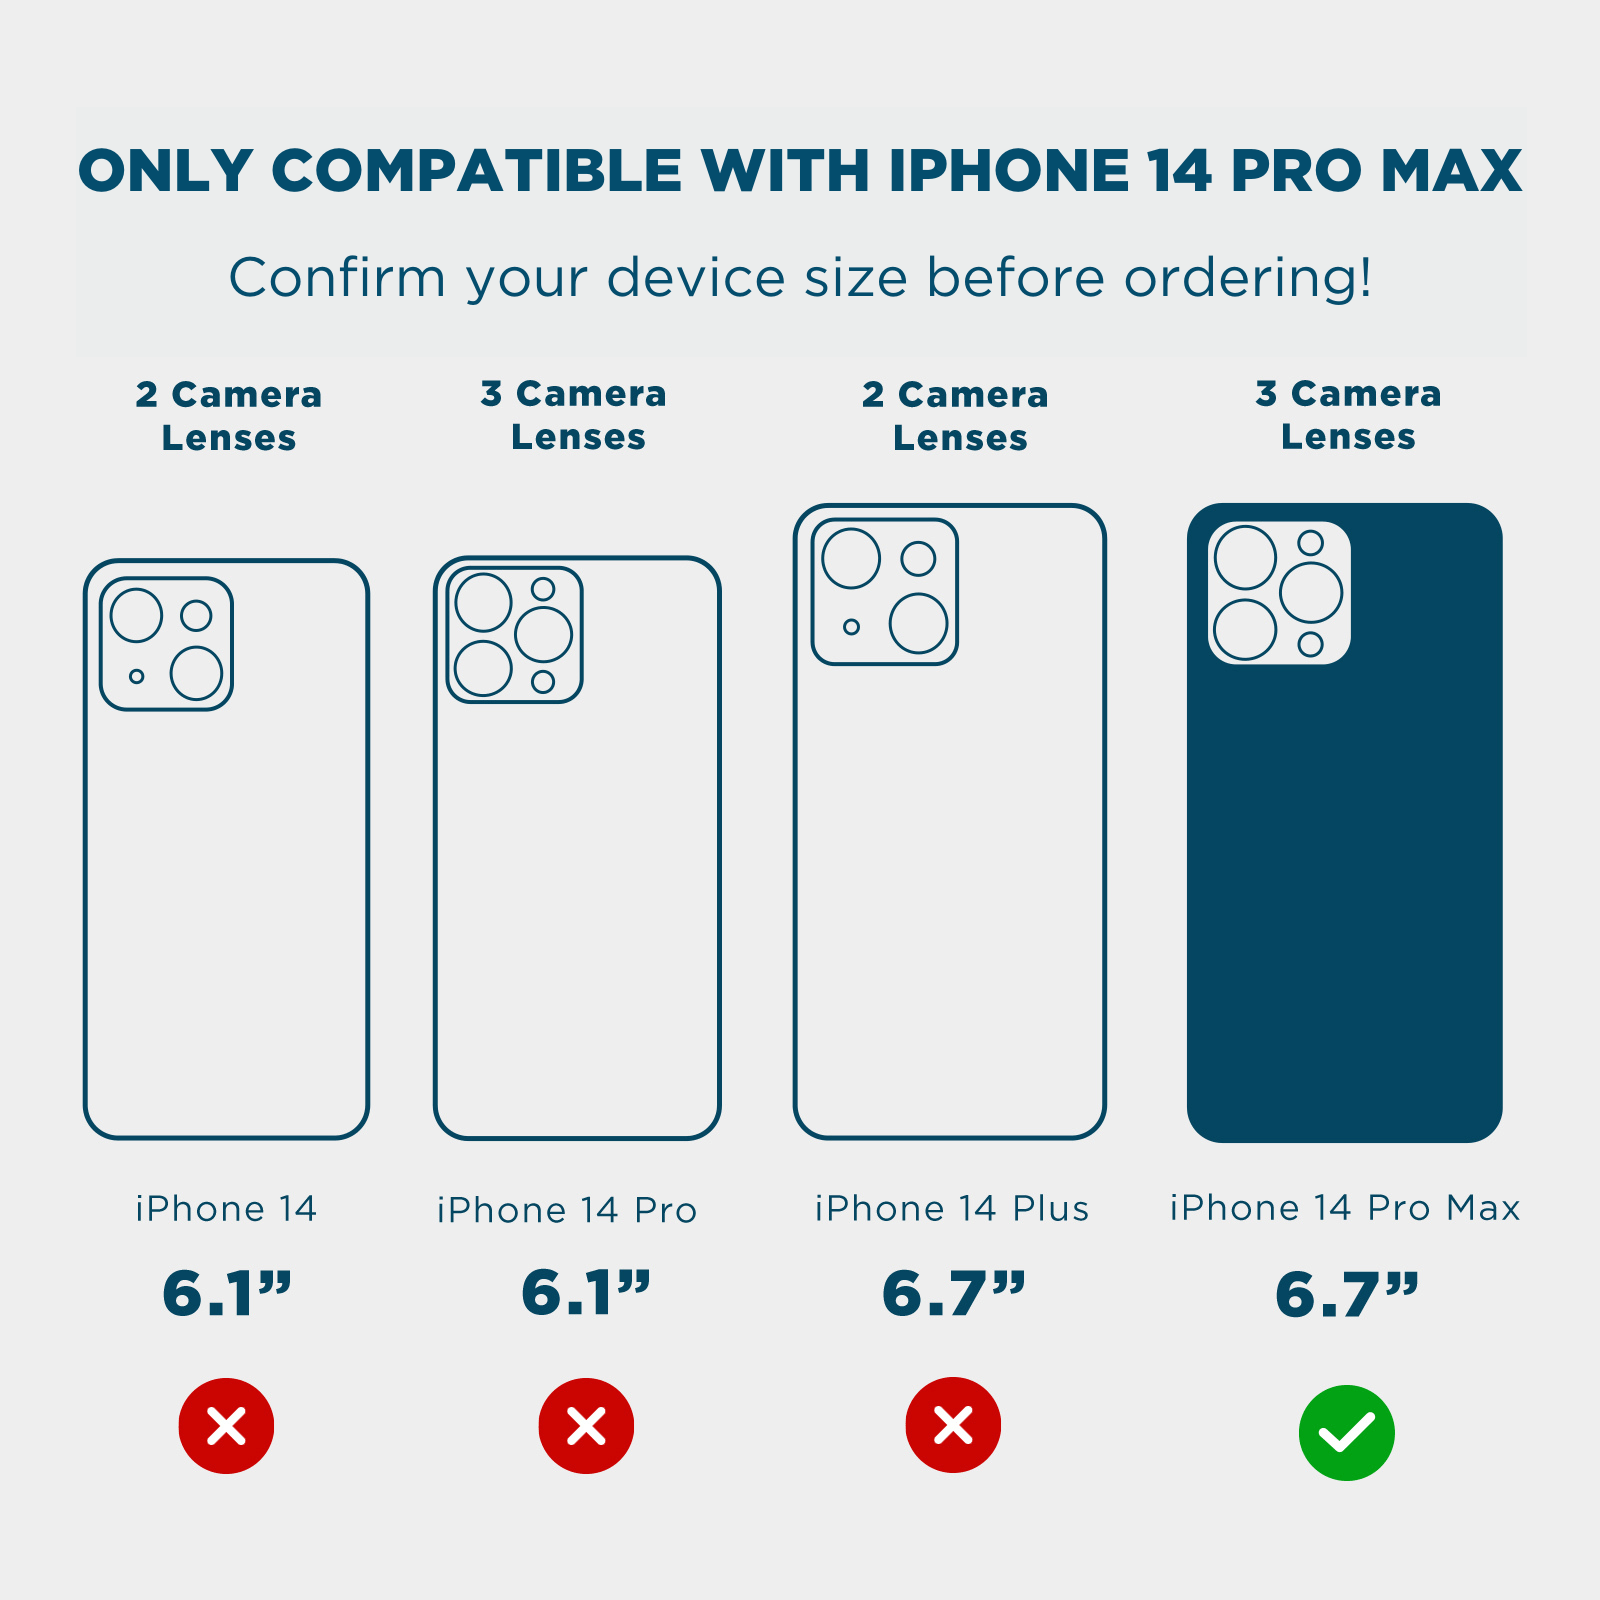 ONLY COMPATIBLE WITH IPHONE 14 PRO MAX. CONFIRM YOUR DEVICE SIZE BEFORE ORDERING. 2 CAMERA LENSES, 3 CAMERA LENSES, 2 CAMERA LENSES, 3 CAMERA LENSES, 6.1, 6.1, 6.7, 6.7. COLOR::IRIDESCENT